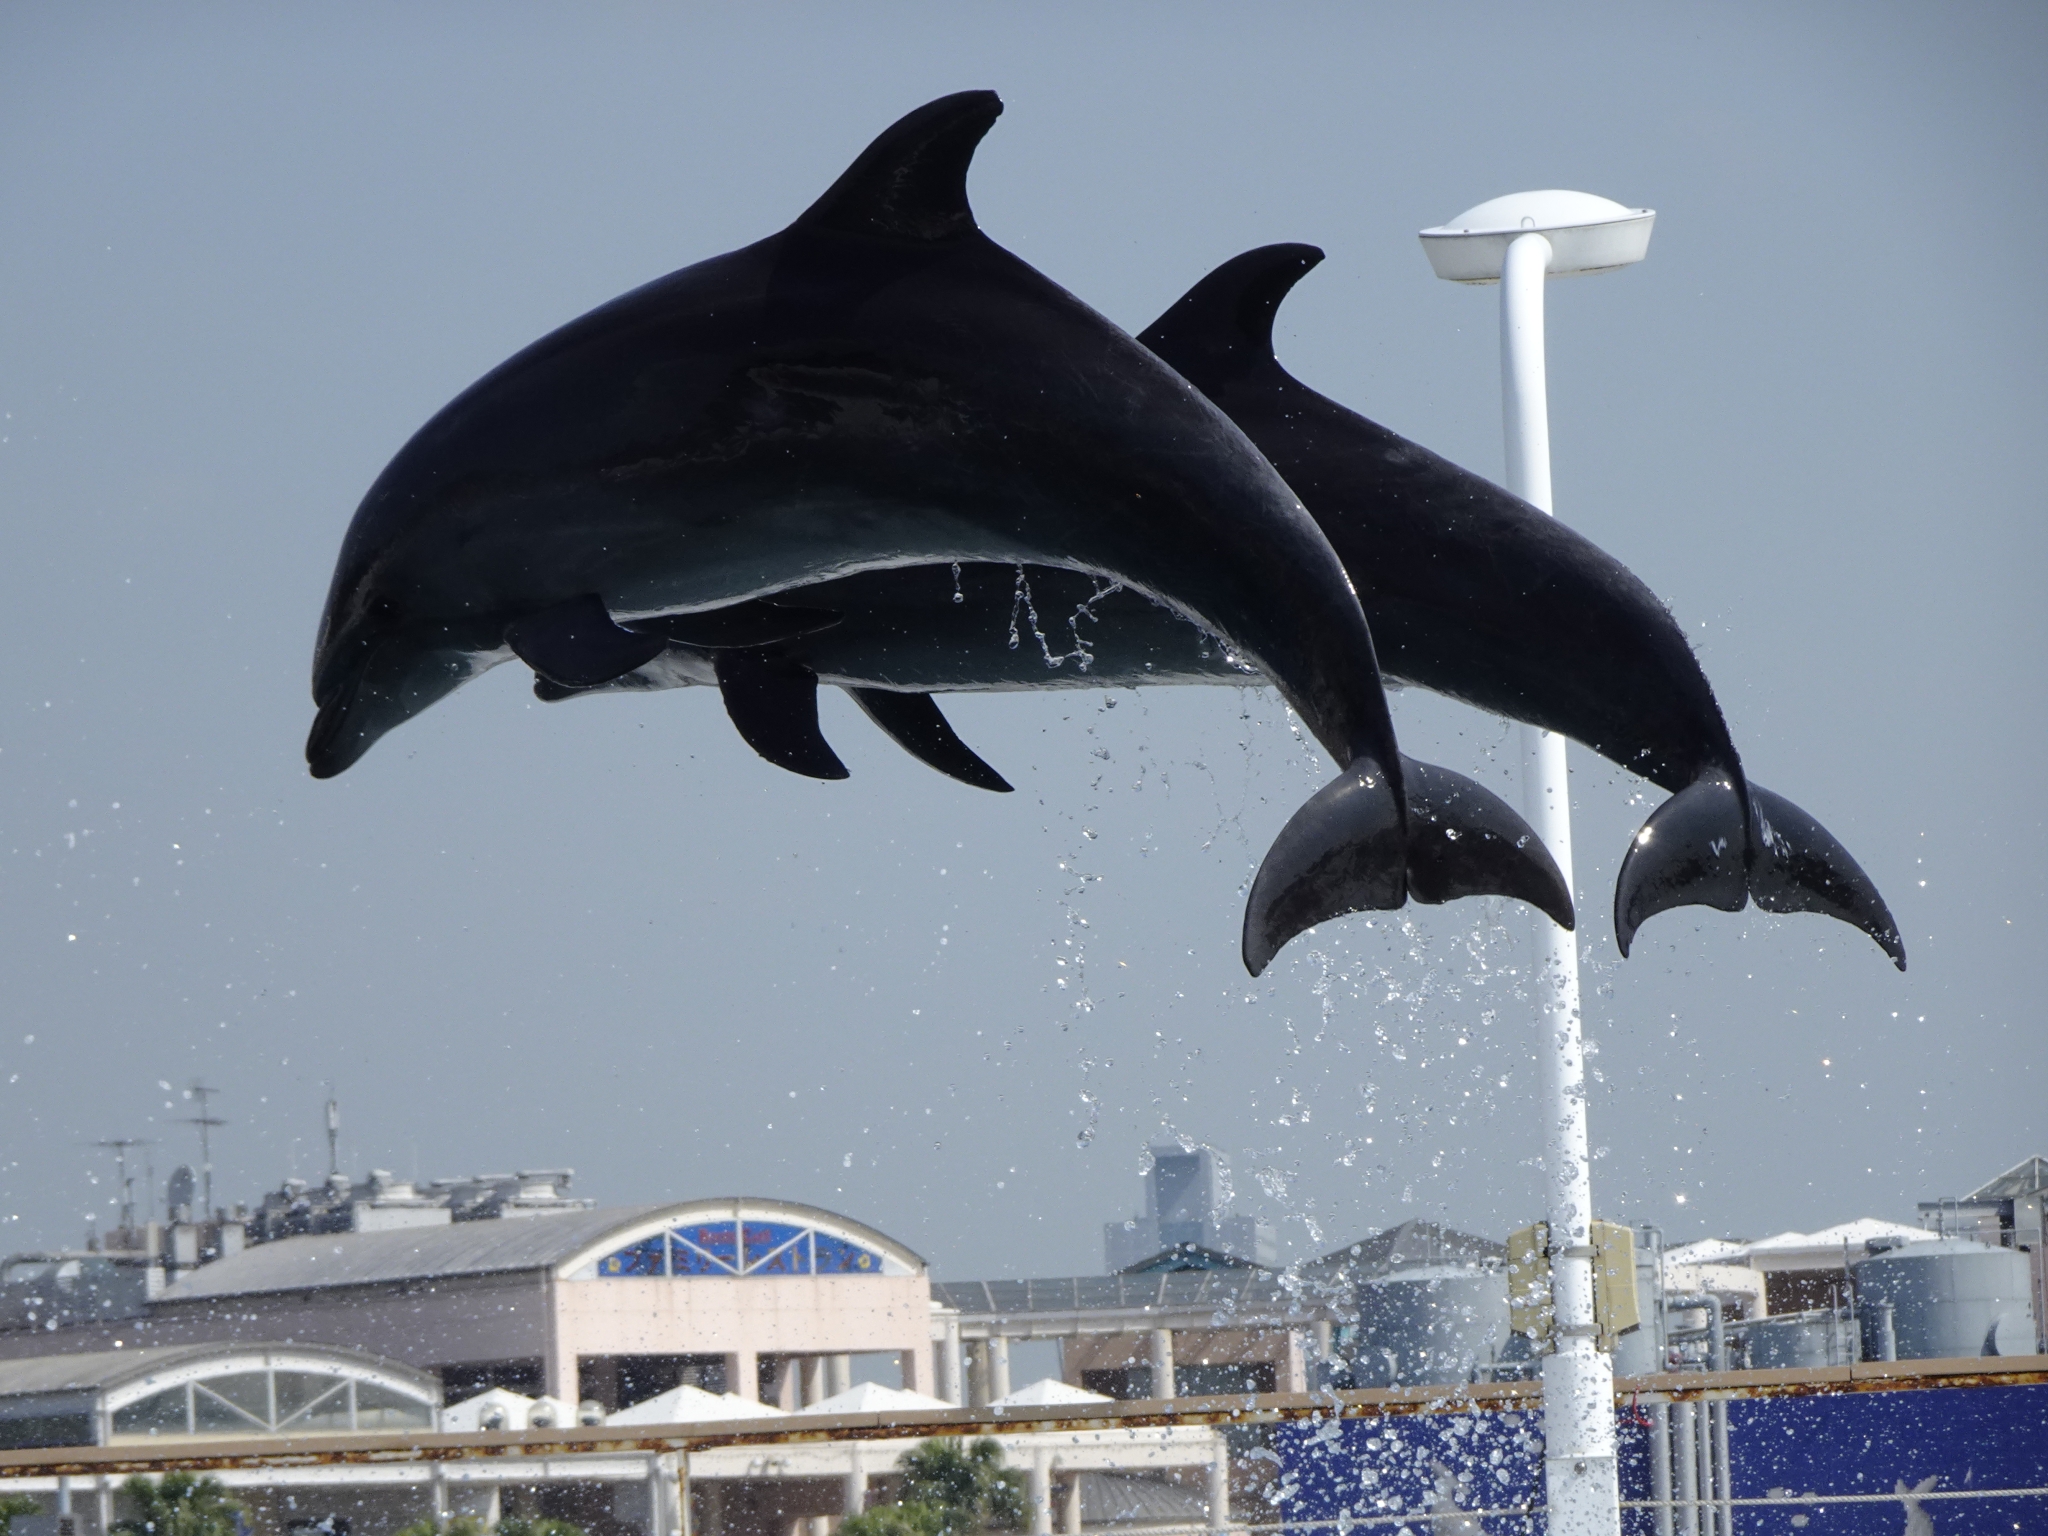 Two dolphins jumping synchronously in a show